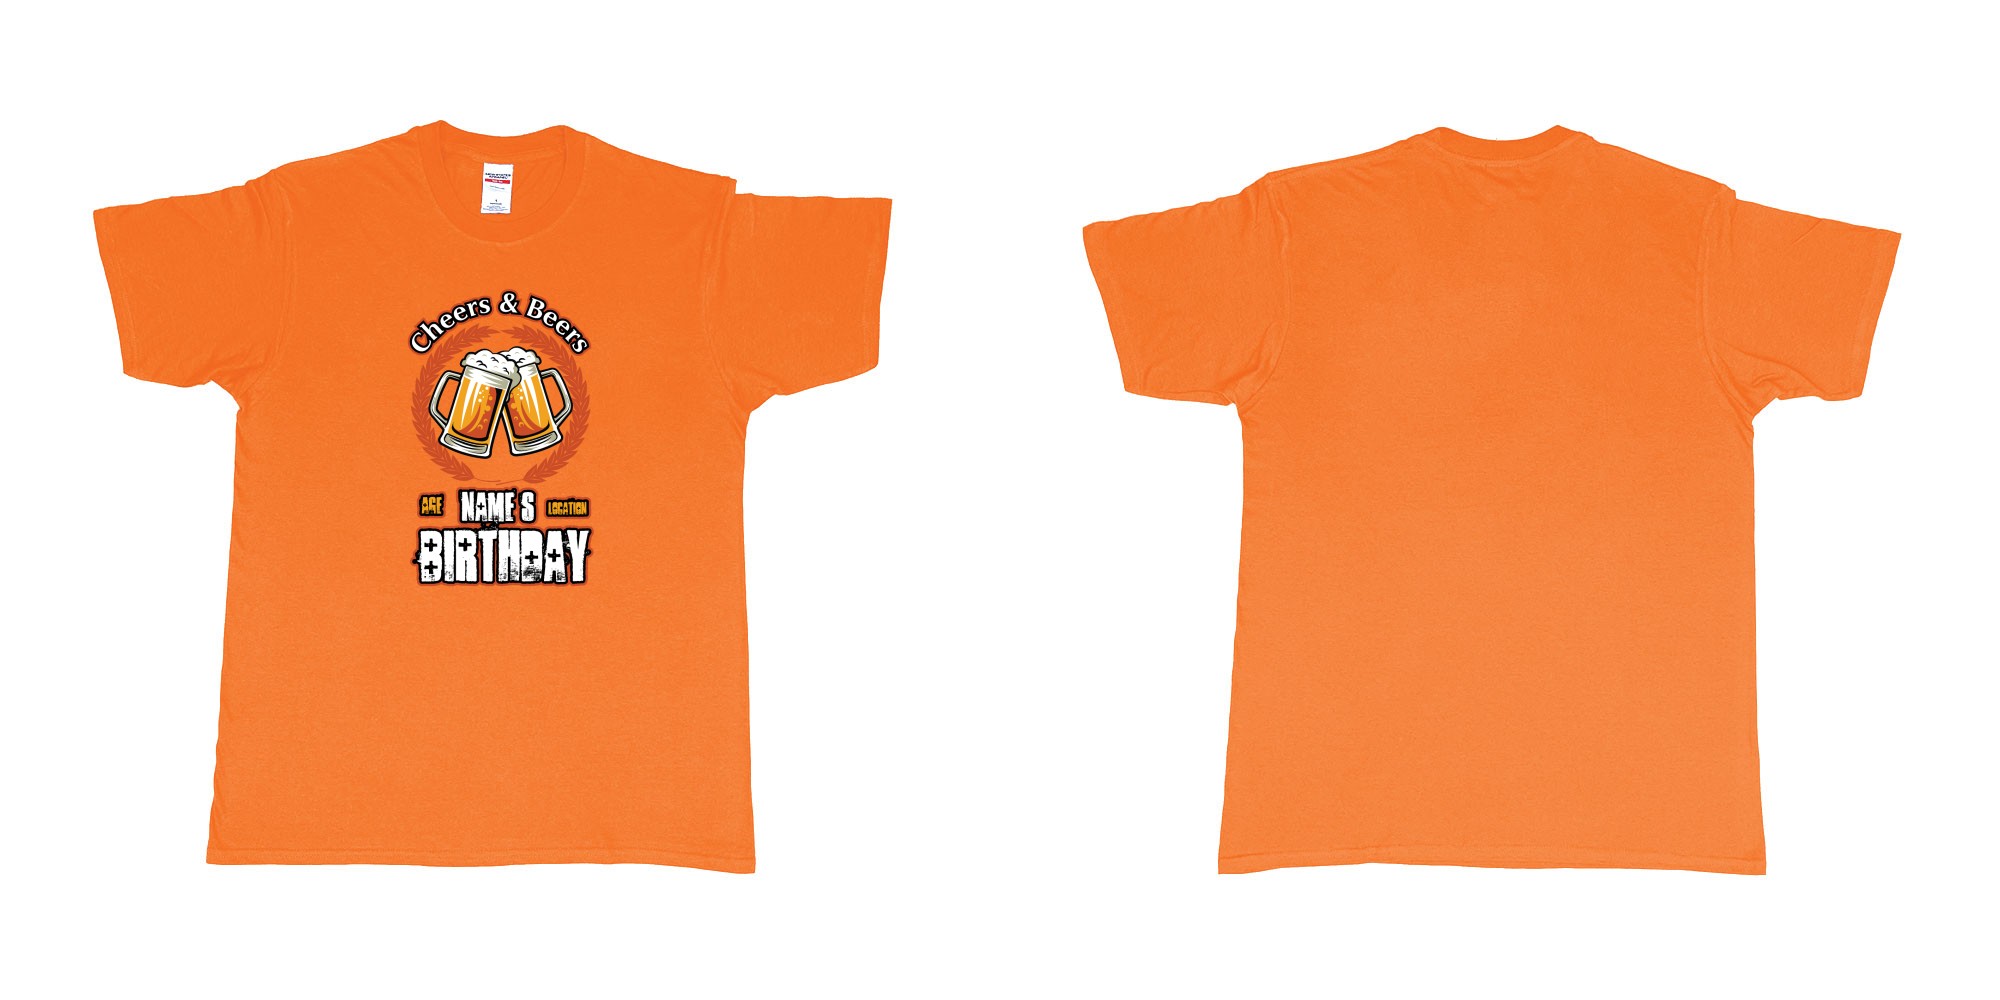 Custom tshirt design cheers and beers birthday in fabric color orange choice your own text made in Bali by The Pirate Way